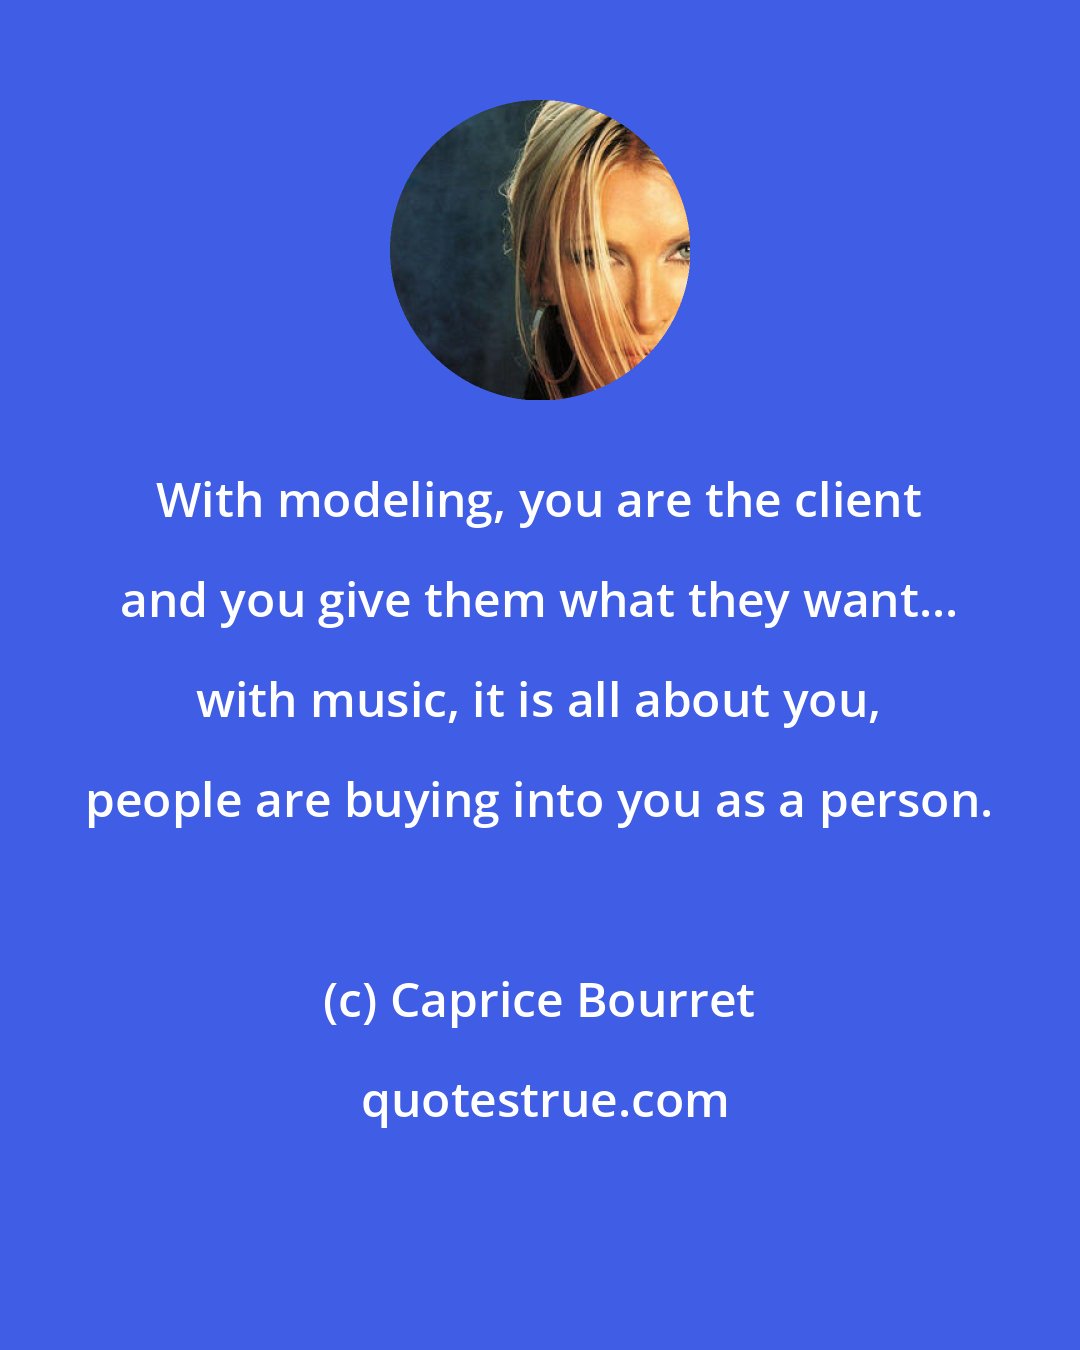 Caprice Bourret: With modeling, you are the client and you give them what they want... with music, it is all about you, people are buying into you as a person.